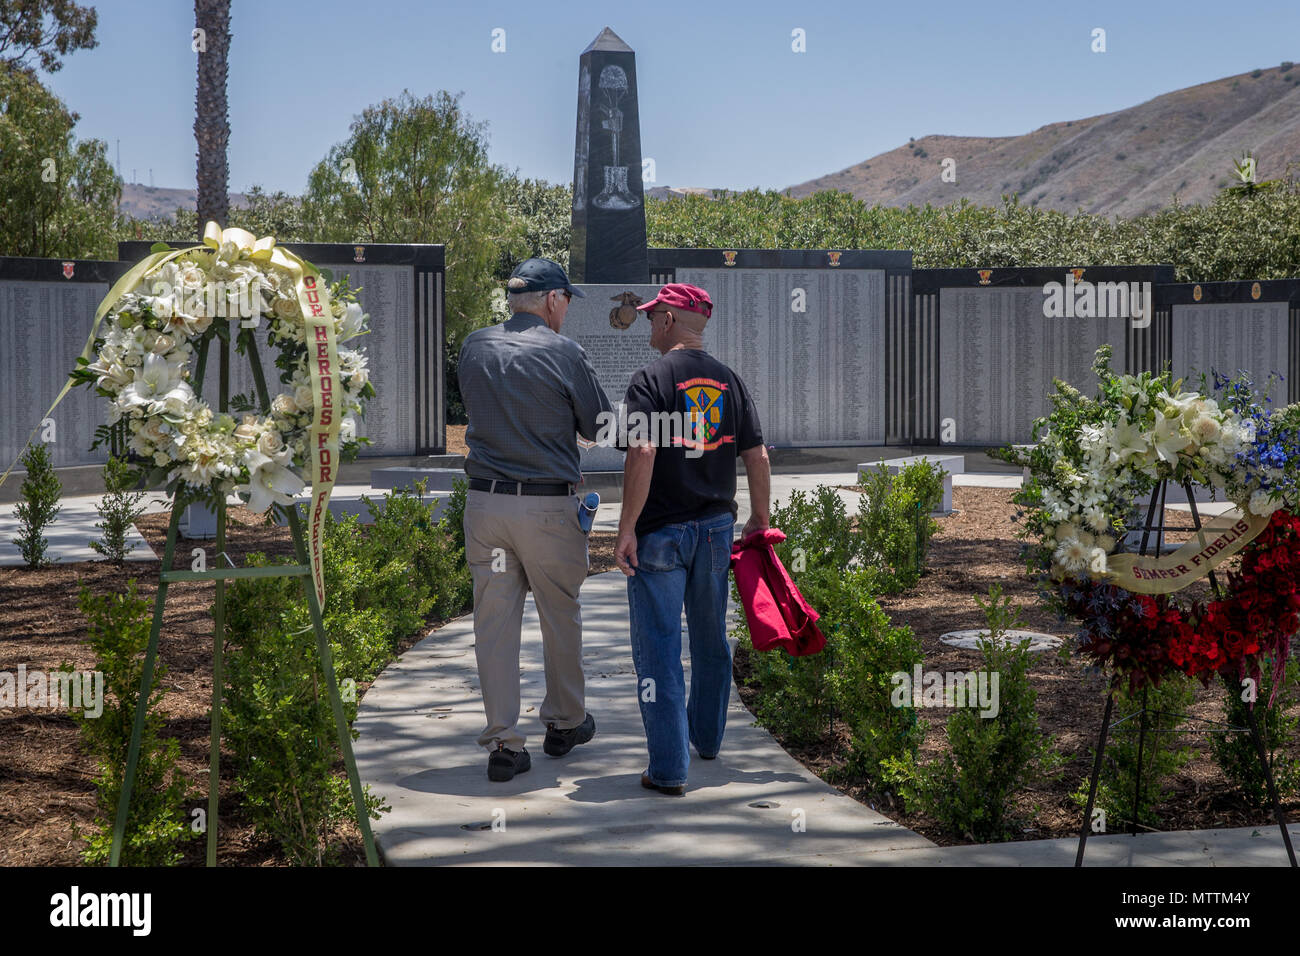 U.S. Marine Corps and Navy veterans observe the 5th Marines Vietnam War Memorial during the unveiling ceremony in the Camp San Mateo Memorial Garden at Marine Corps Base Camp Pendleton, Calif., May 28, 2018. The memorial is inscribed with the names of 2,706 Marines and sailors who gave their lives serving our great nation. (U.S. photo by Lance Cpl. Rhita Daniel) Stock Photo